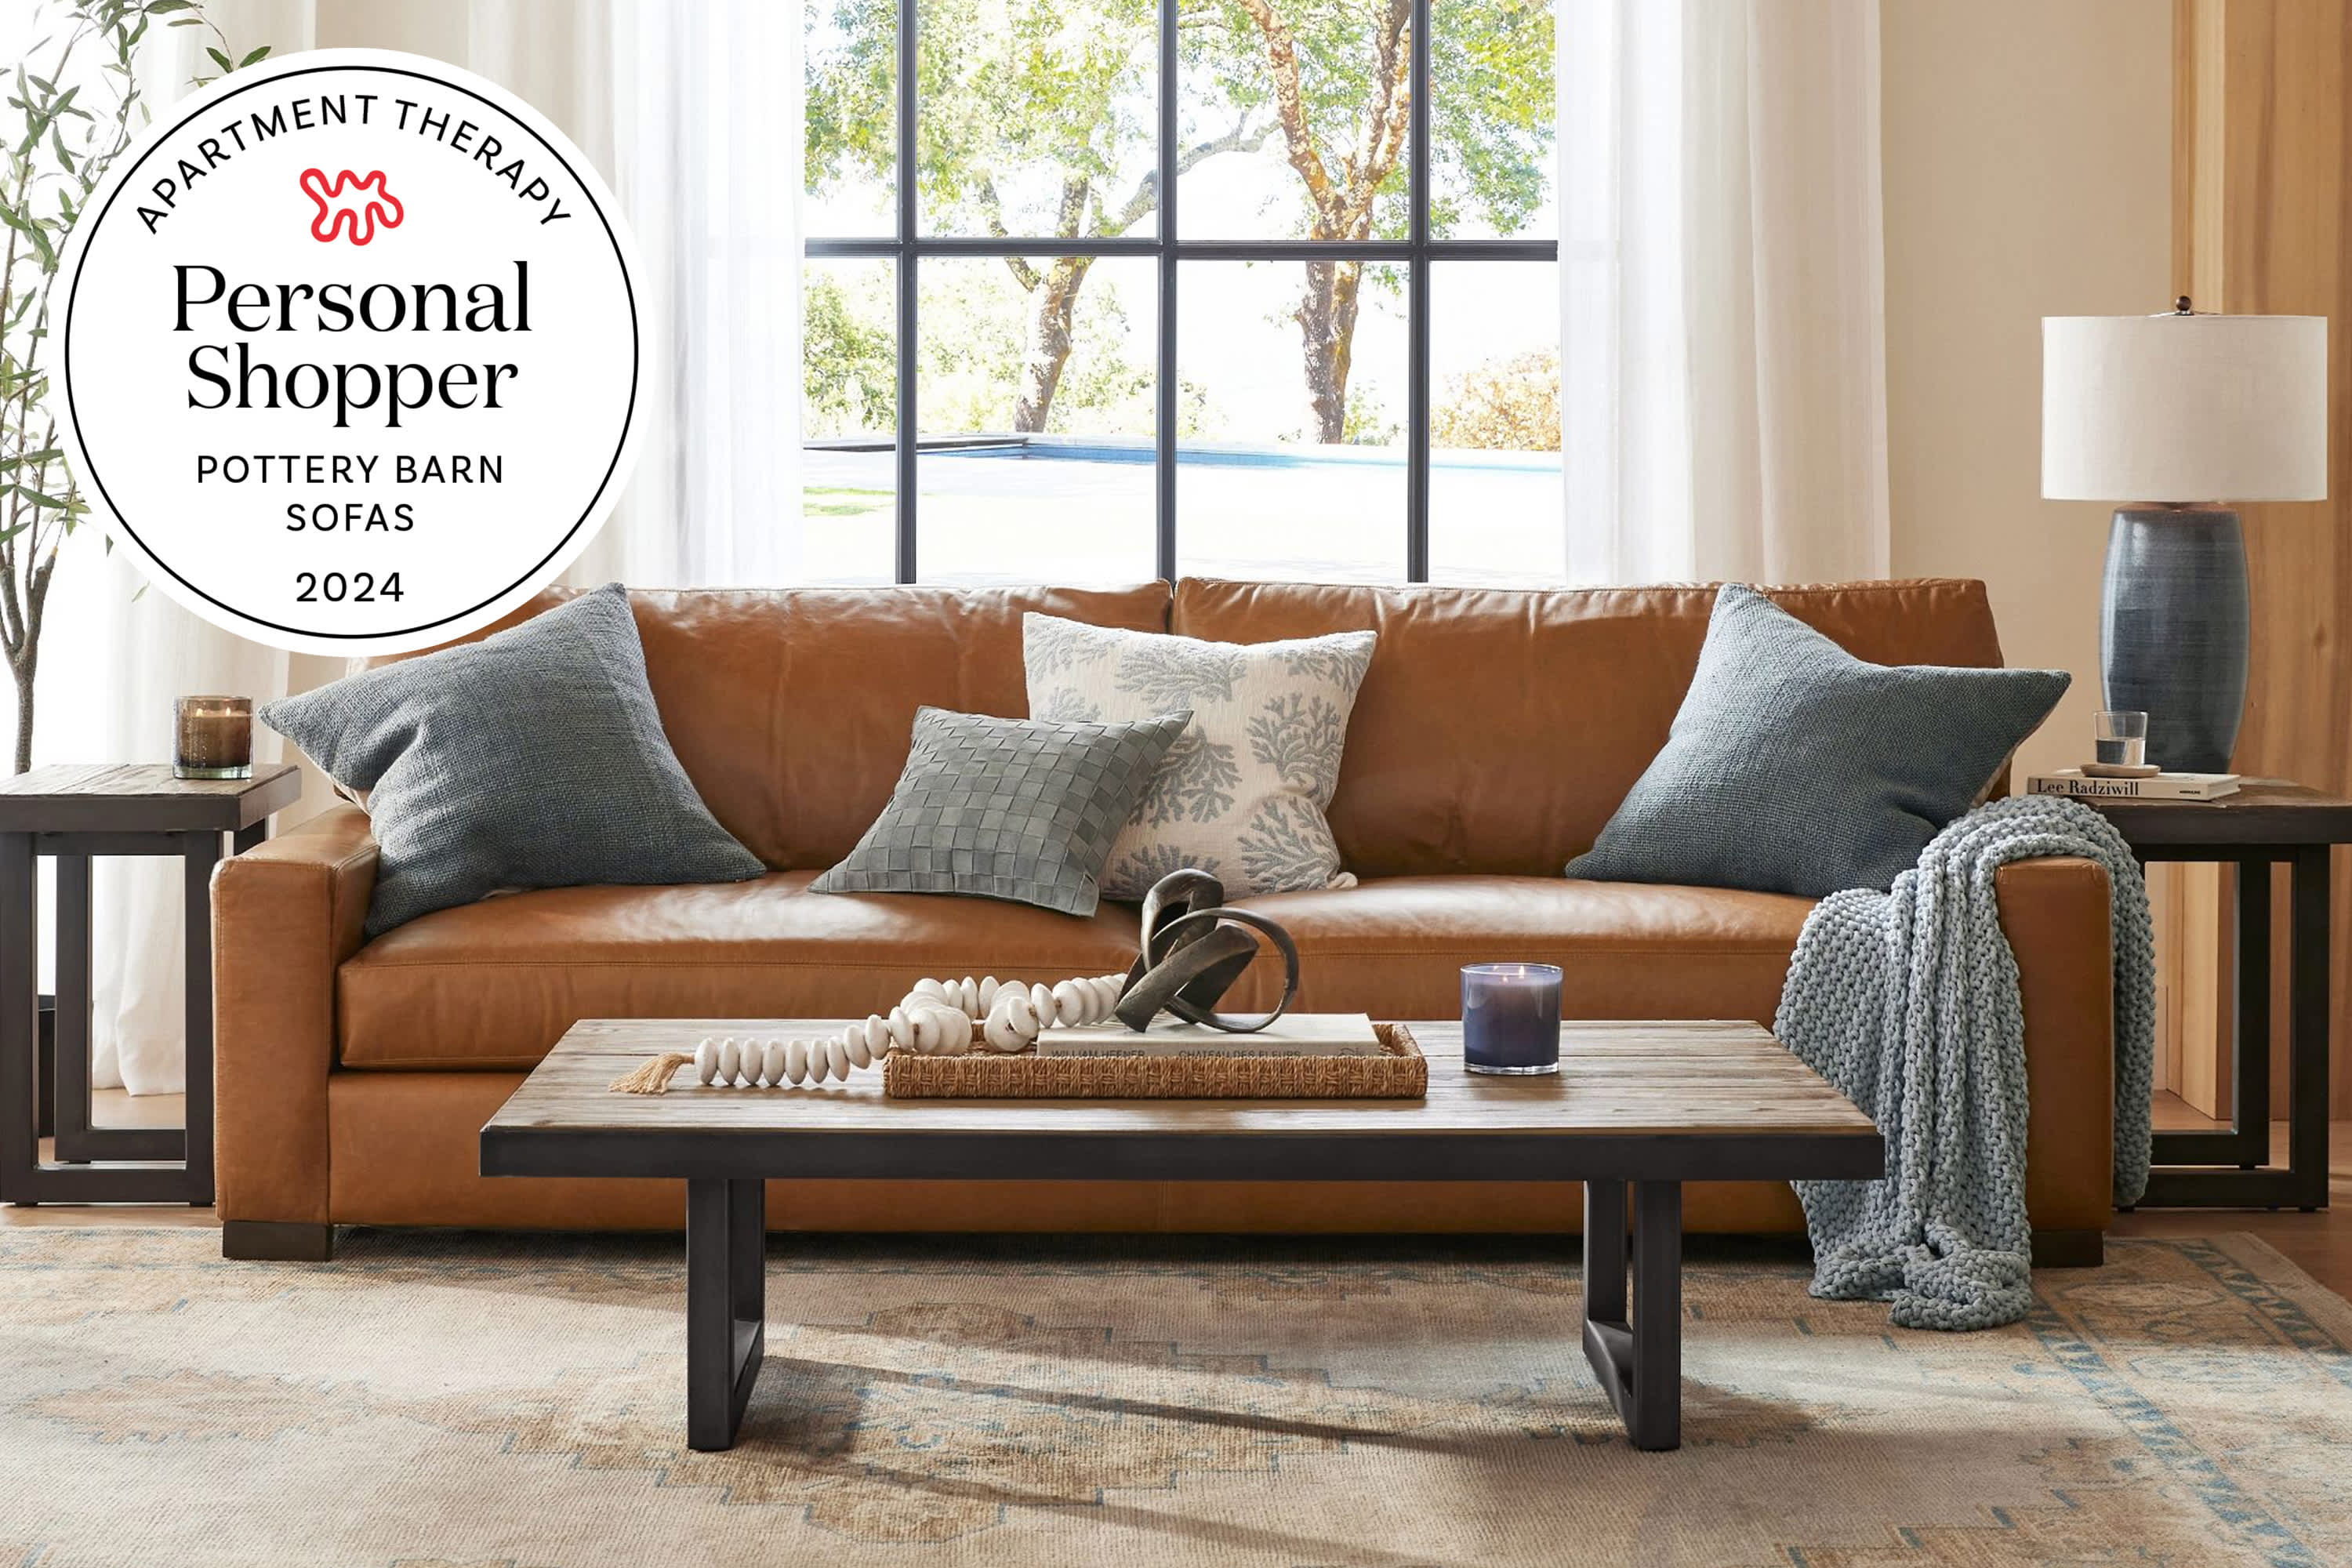 We Tested (and Rated!) All Pottery Barn Sofas & Sectionals for